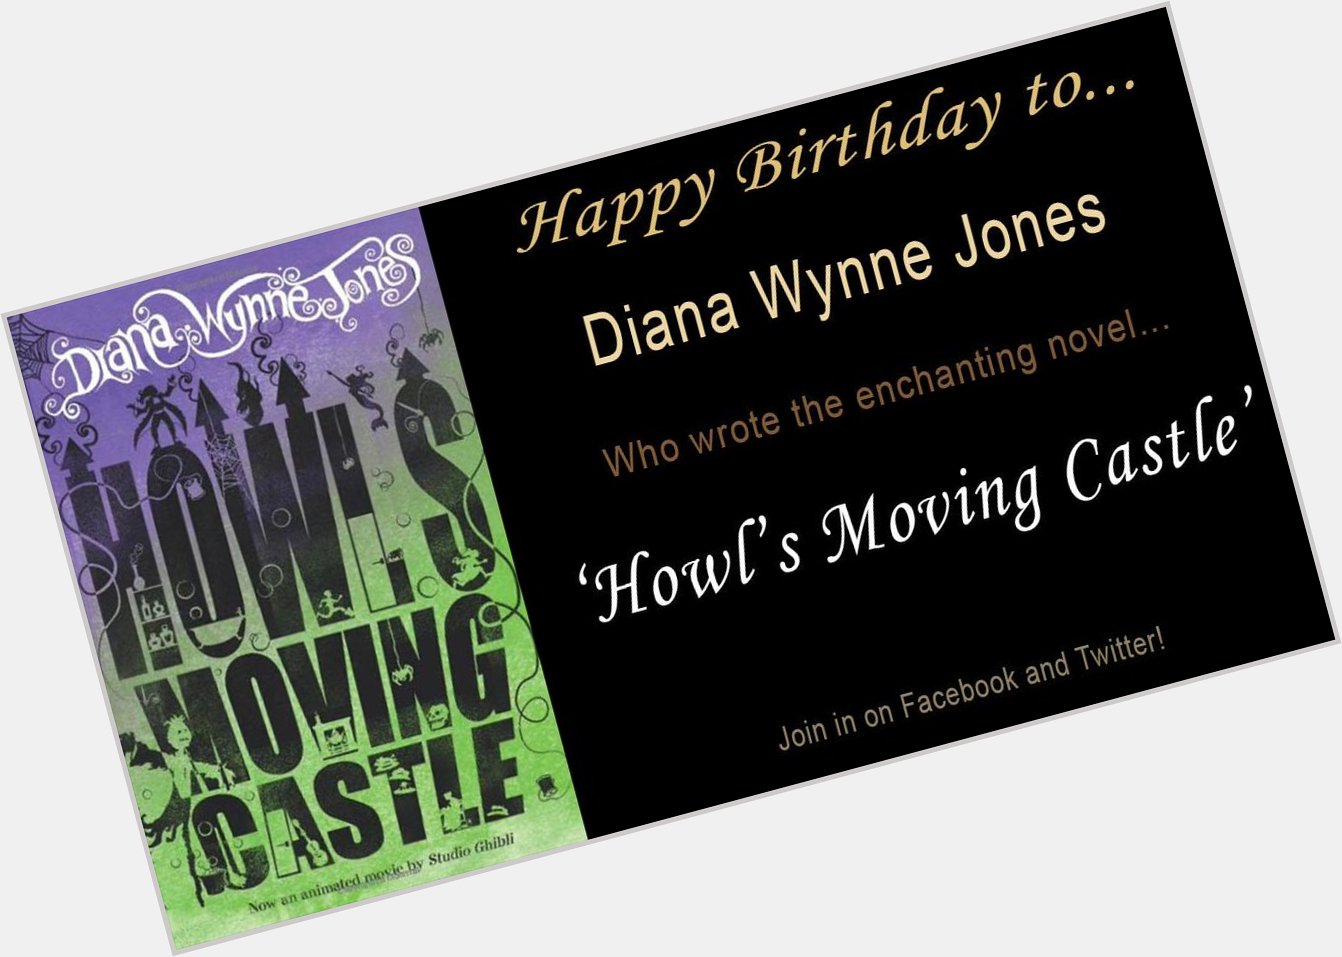 Happy birthday to Diana Wynne Jones who wrote the enchanting and incredible novel \Howl\s Moving Castle. 